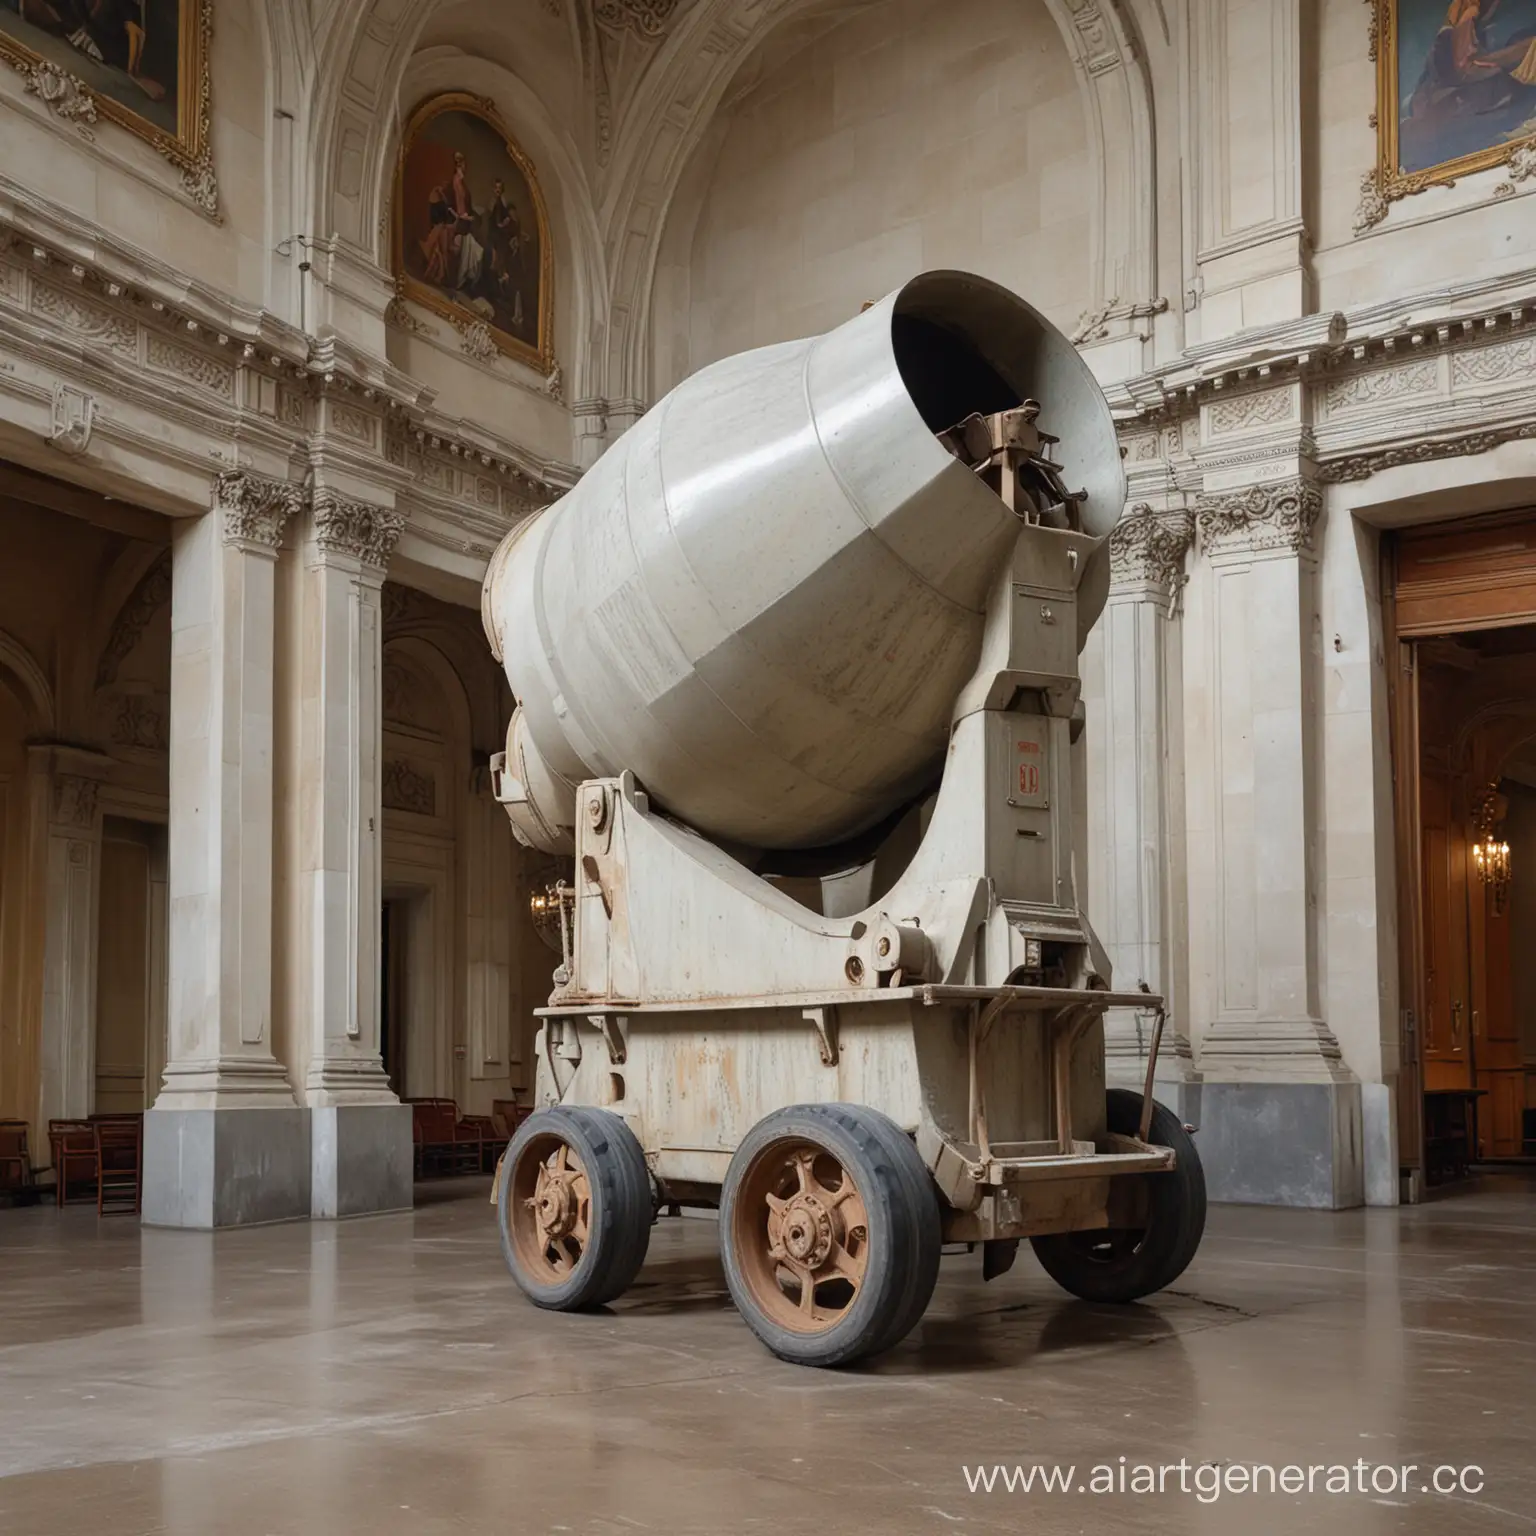 Operatic-Hall-with-Concrete-Mixer-Sculpture